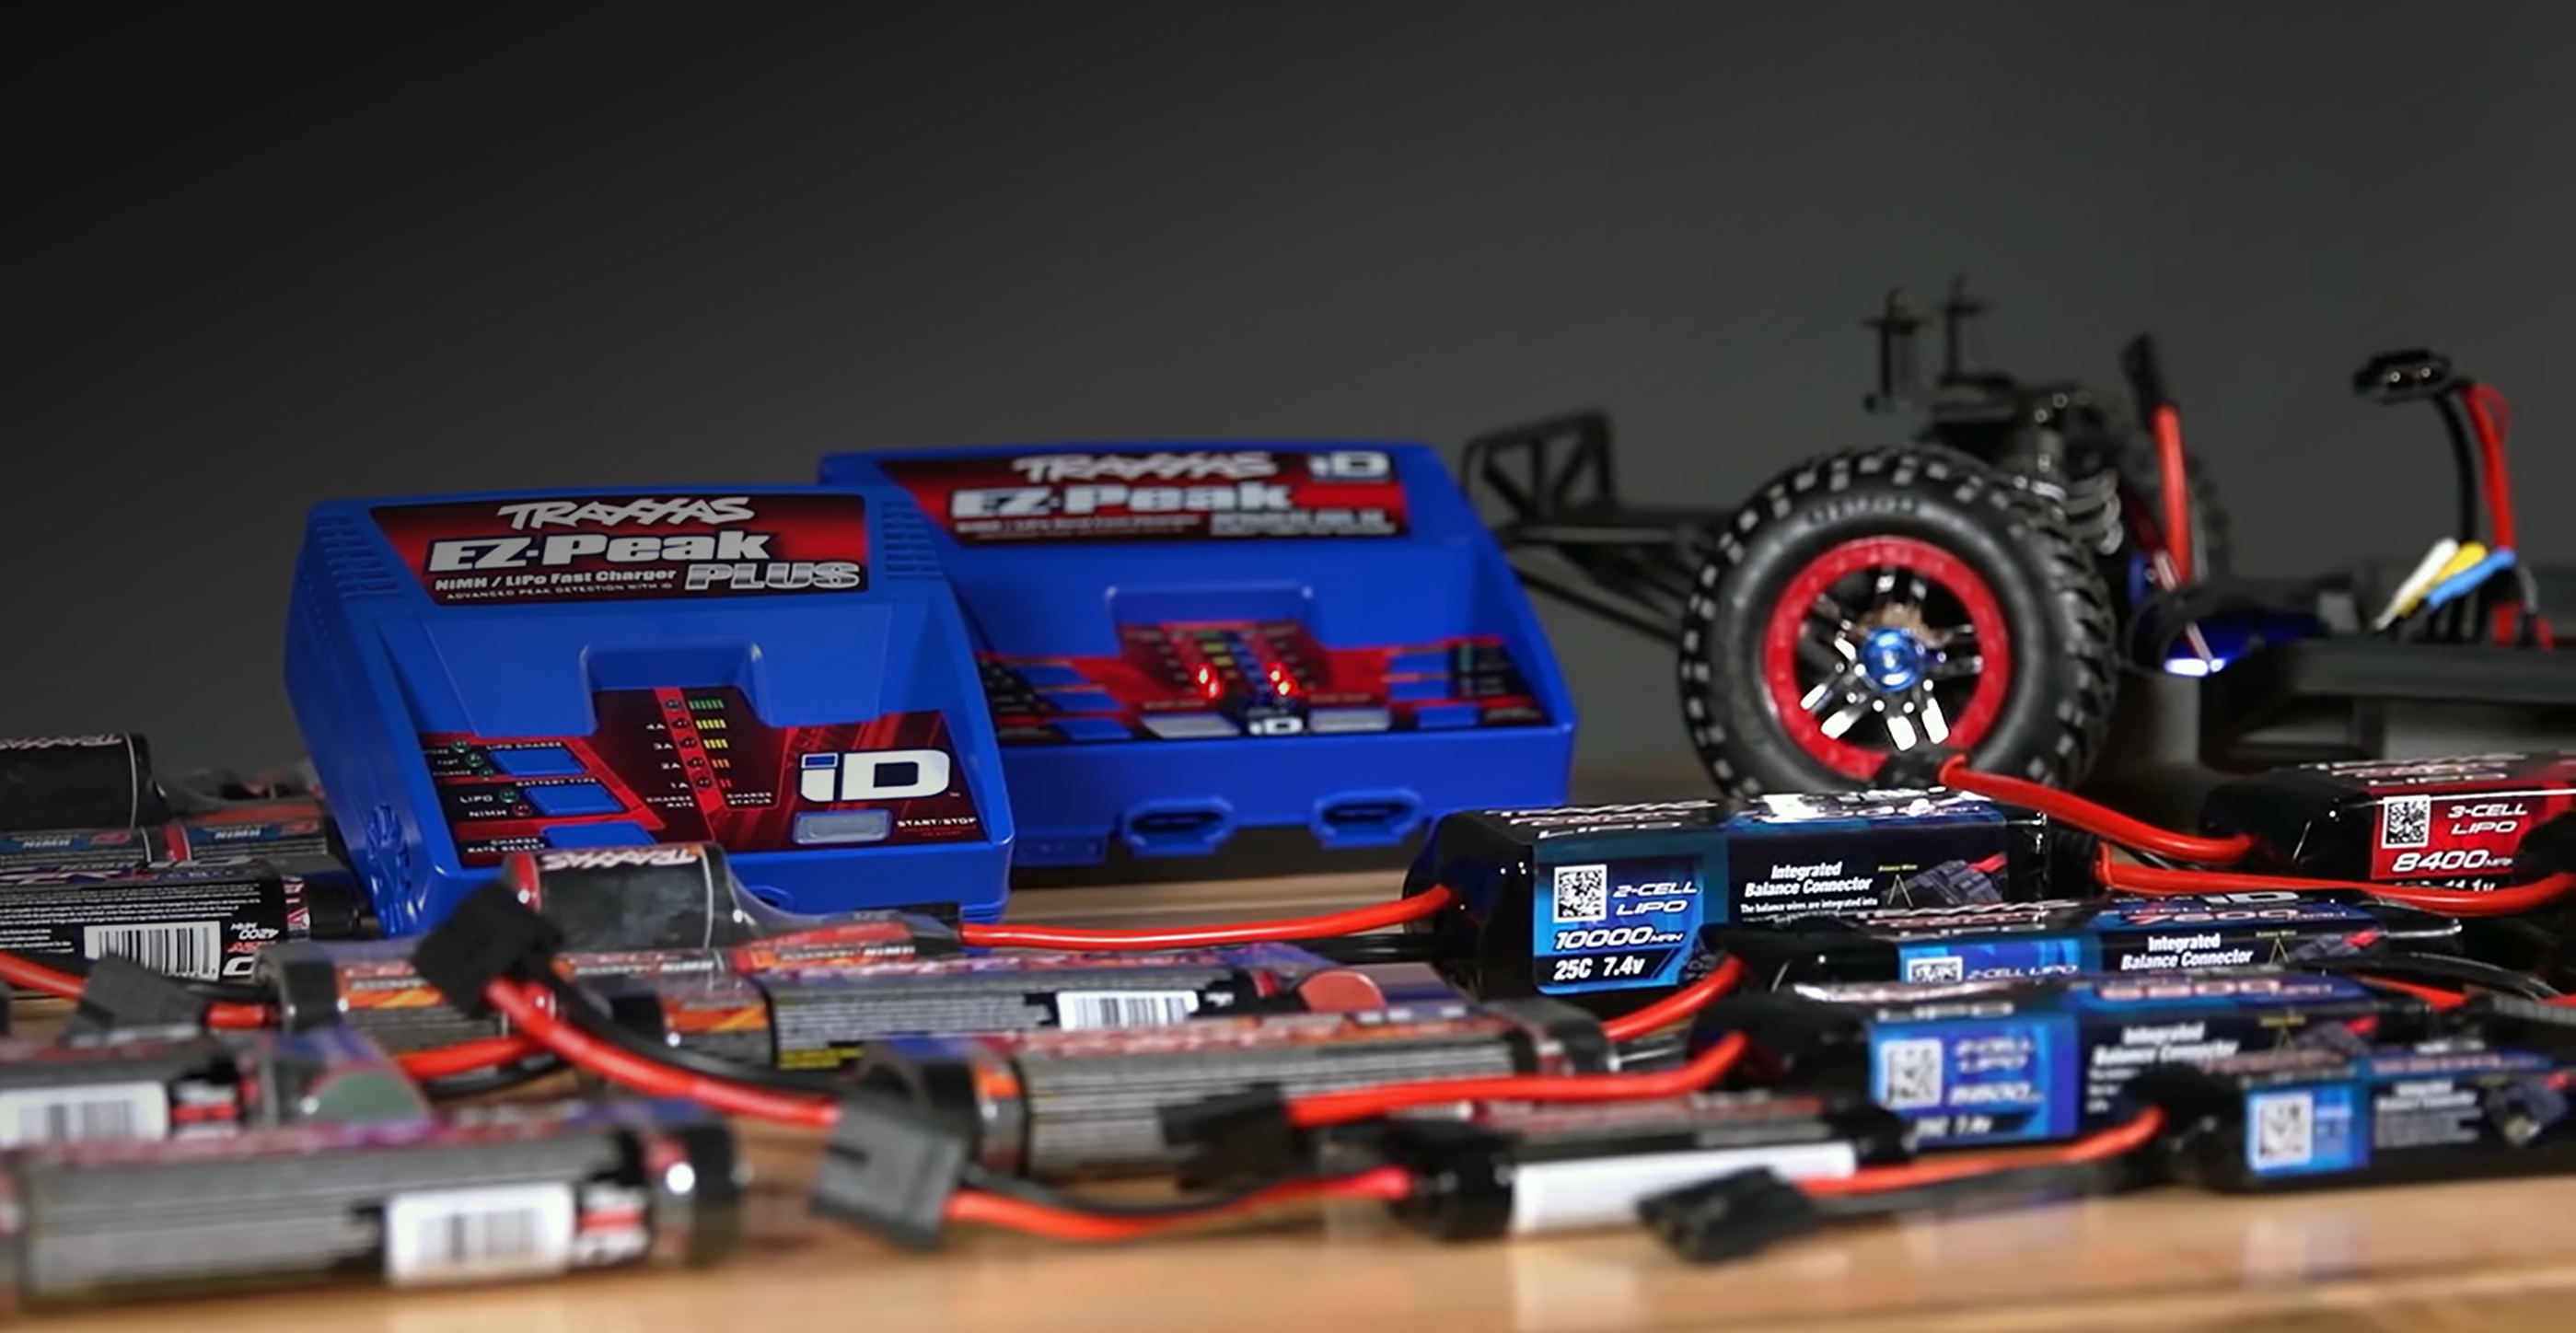 Comparing Traxxas iD Battery Chargers